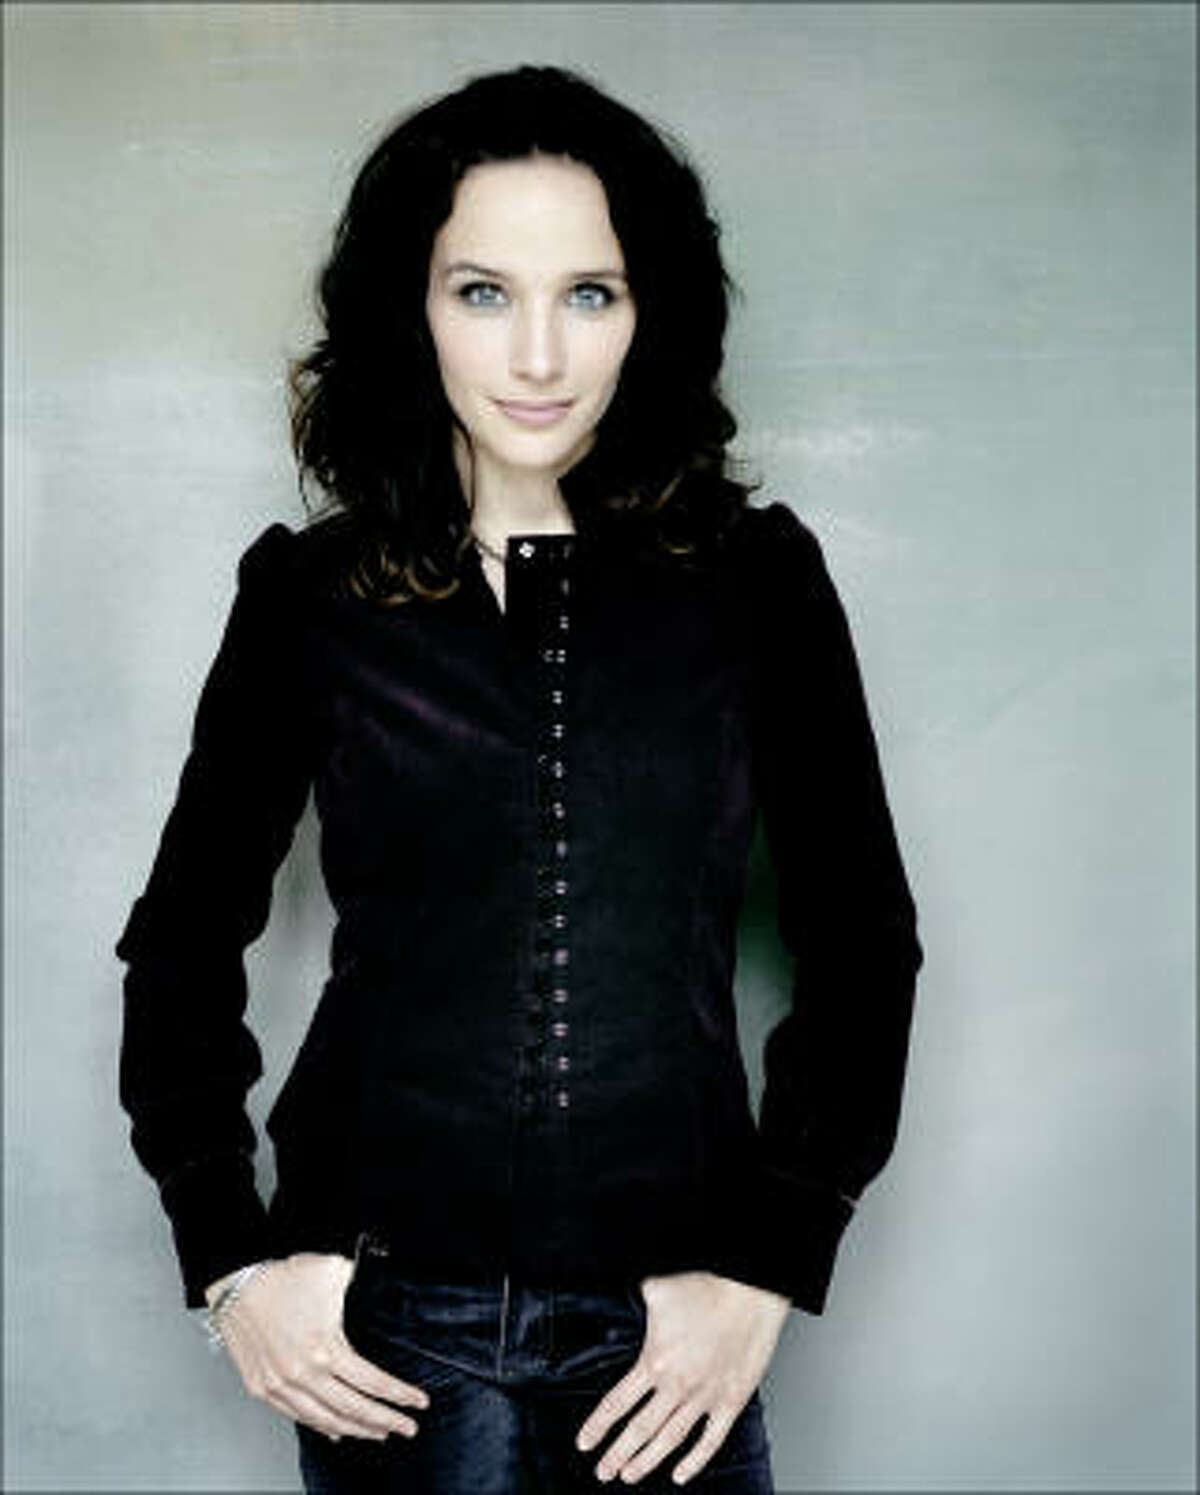 French pianist Hélène Grimaud showed particular delicacy of touch and subtlety of phrasing in the calm second movement of Brahms’ Piano Concerto No. 1.